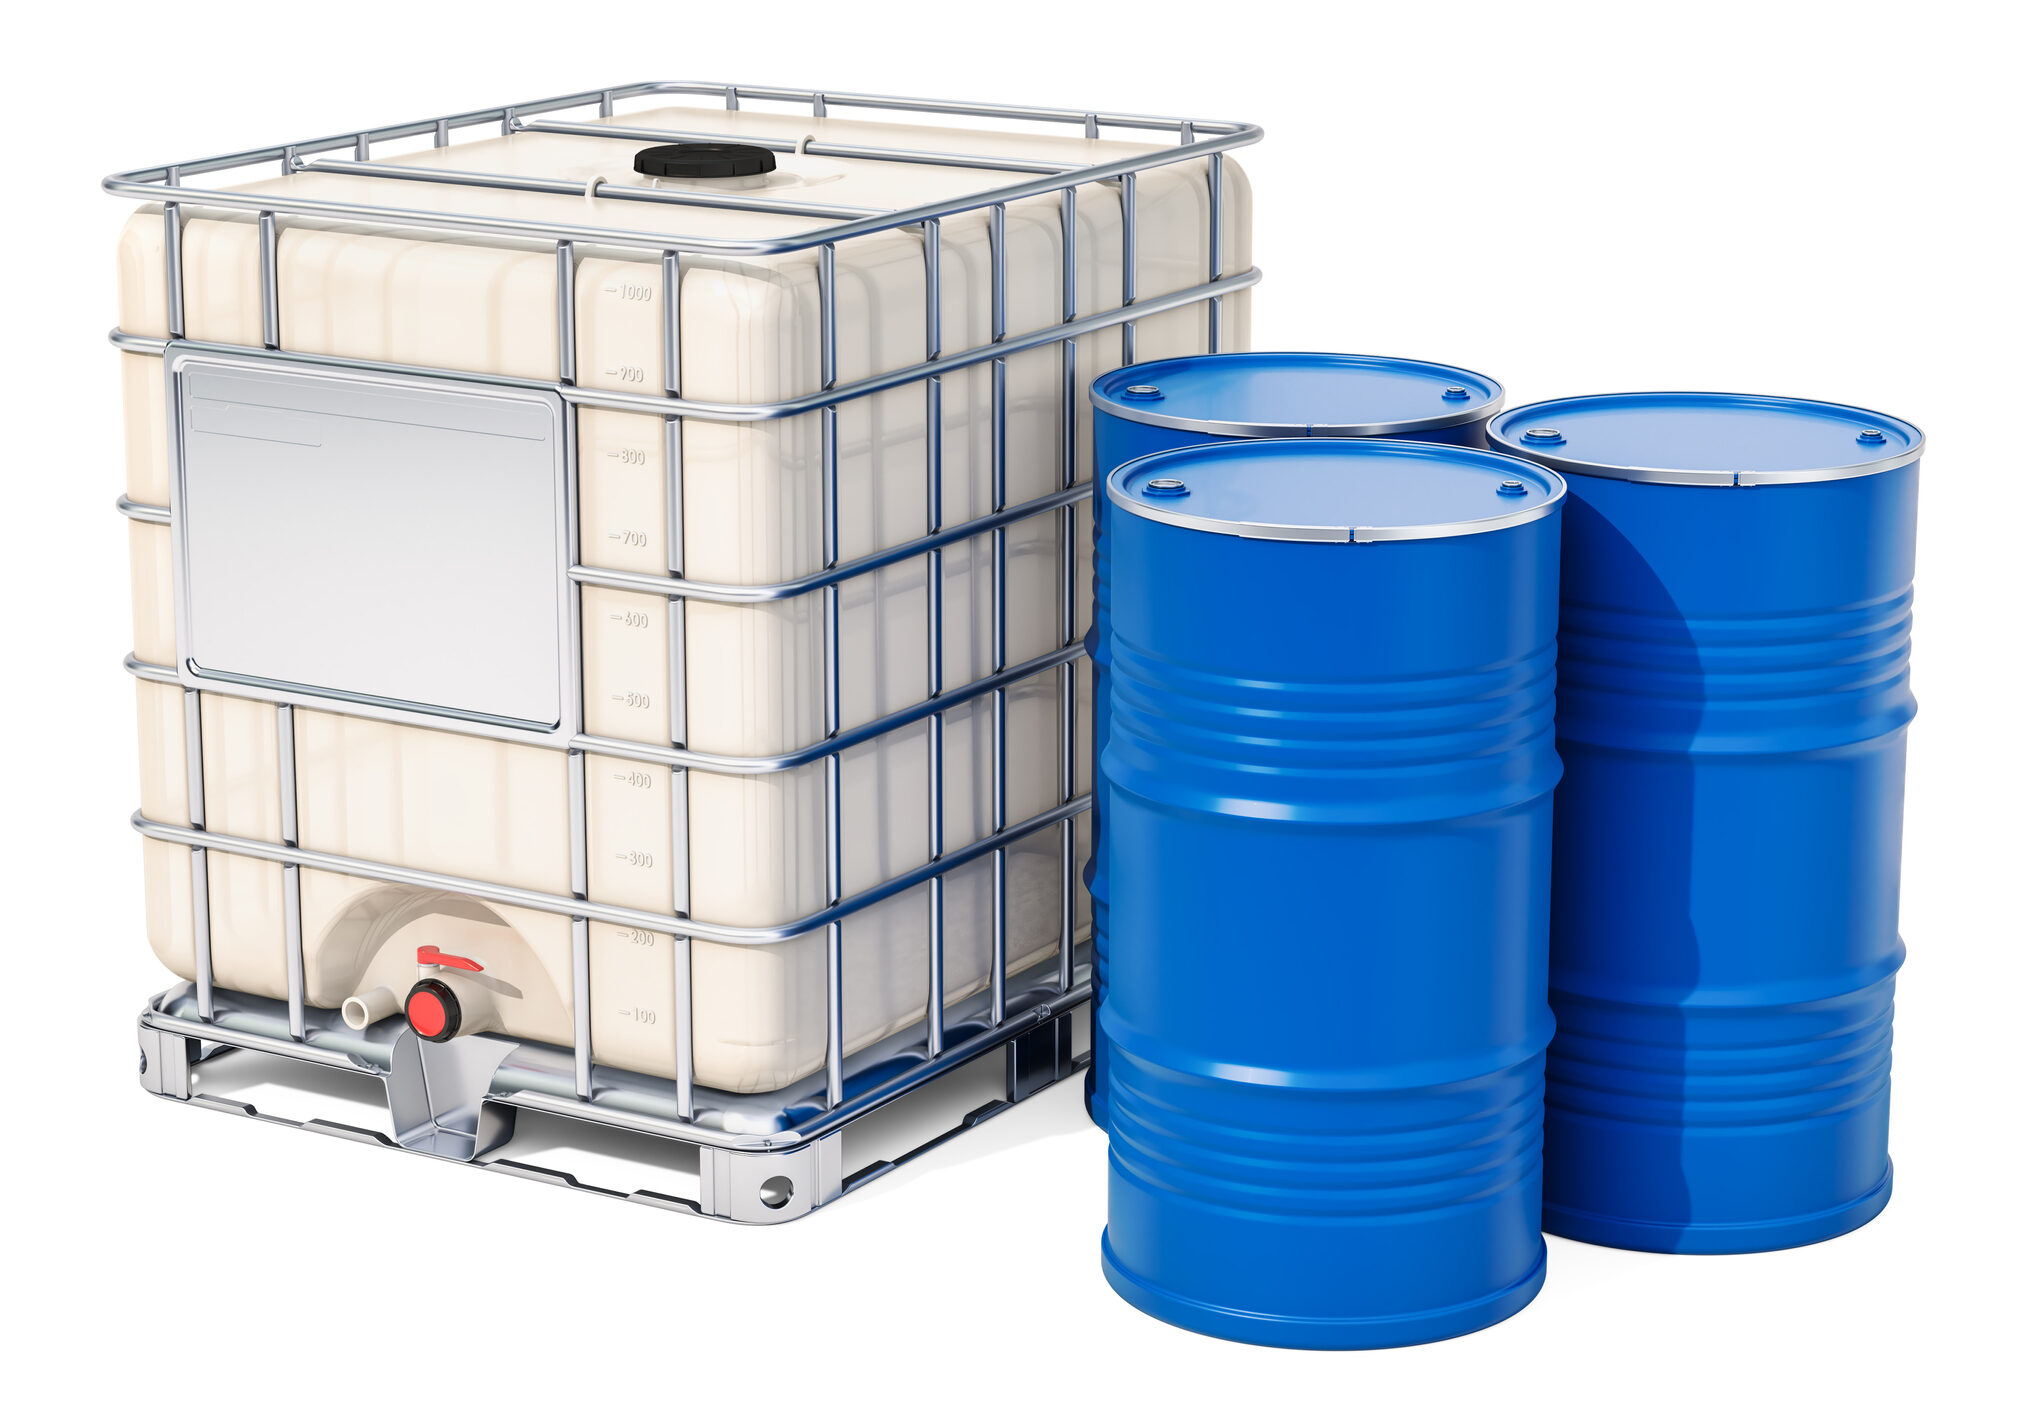 Intermediate bulk container with metallic barrels, 3D rendering isolated on white background